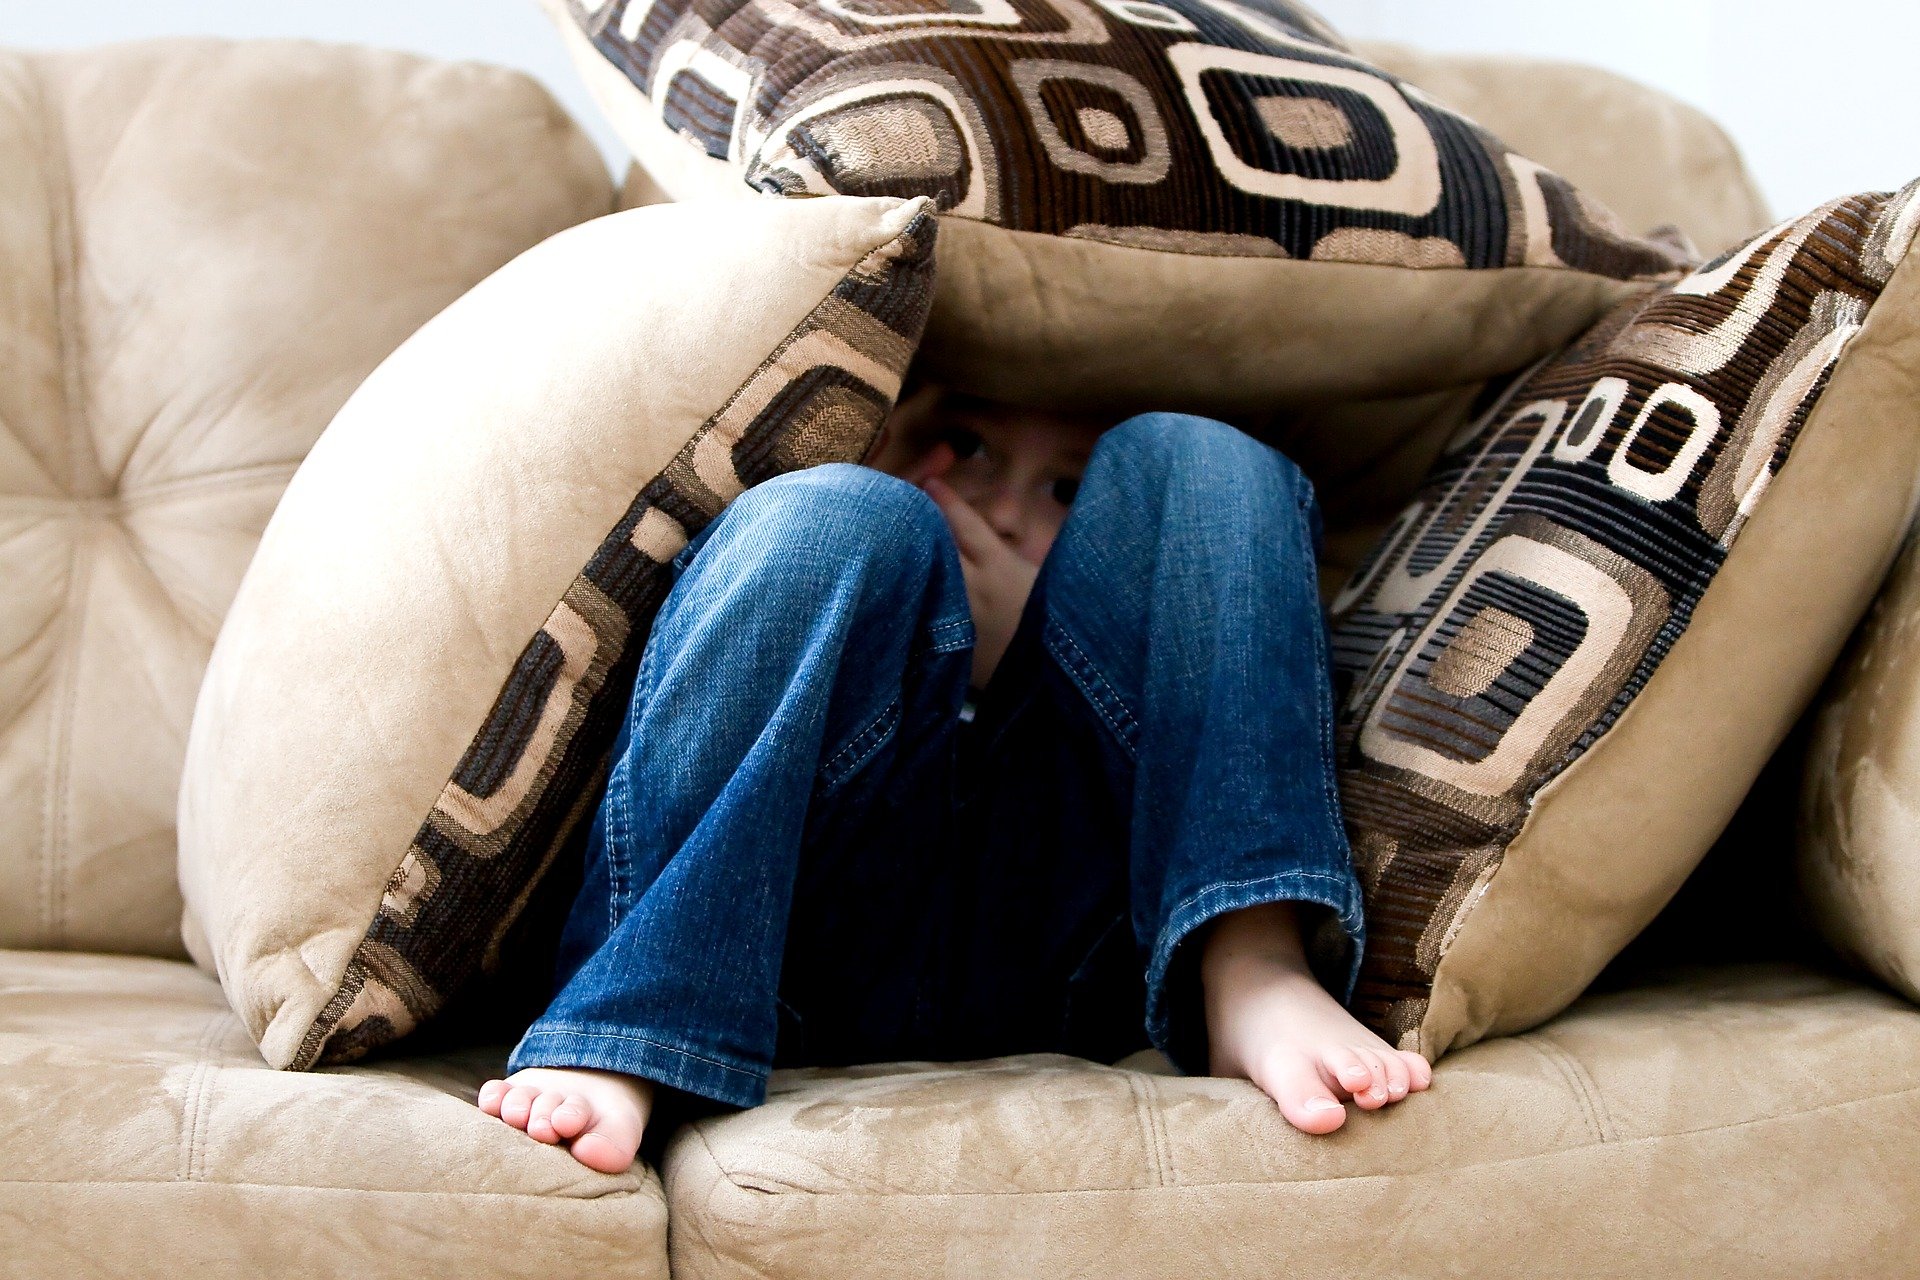 A young boy hides between the pillows on the couch | Source: Pixabay